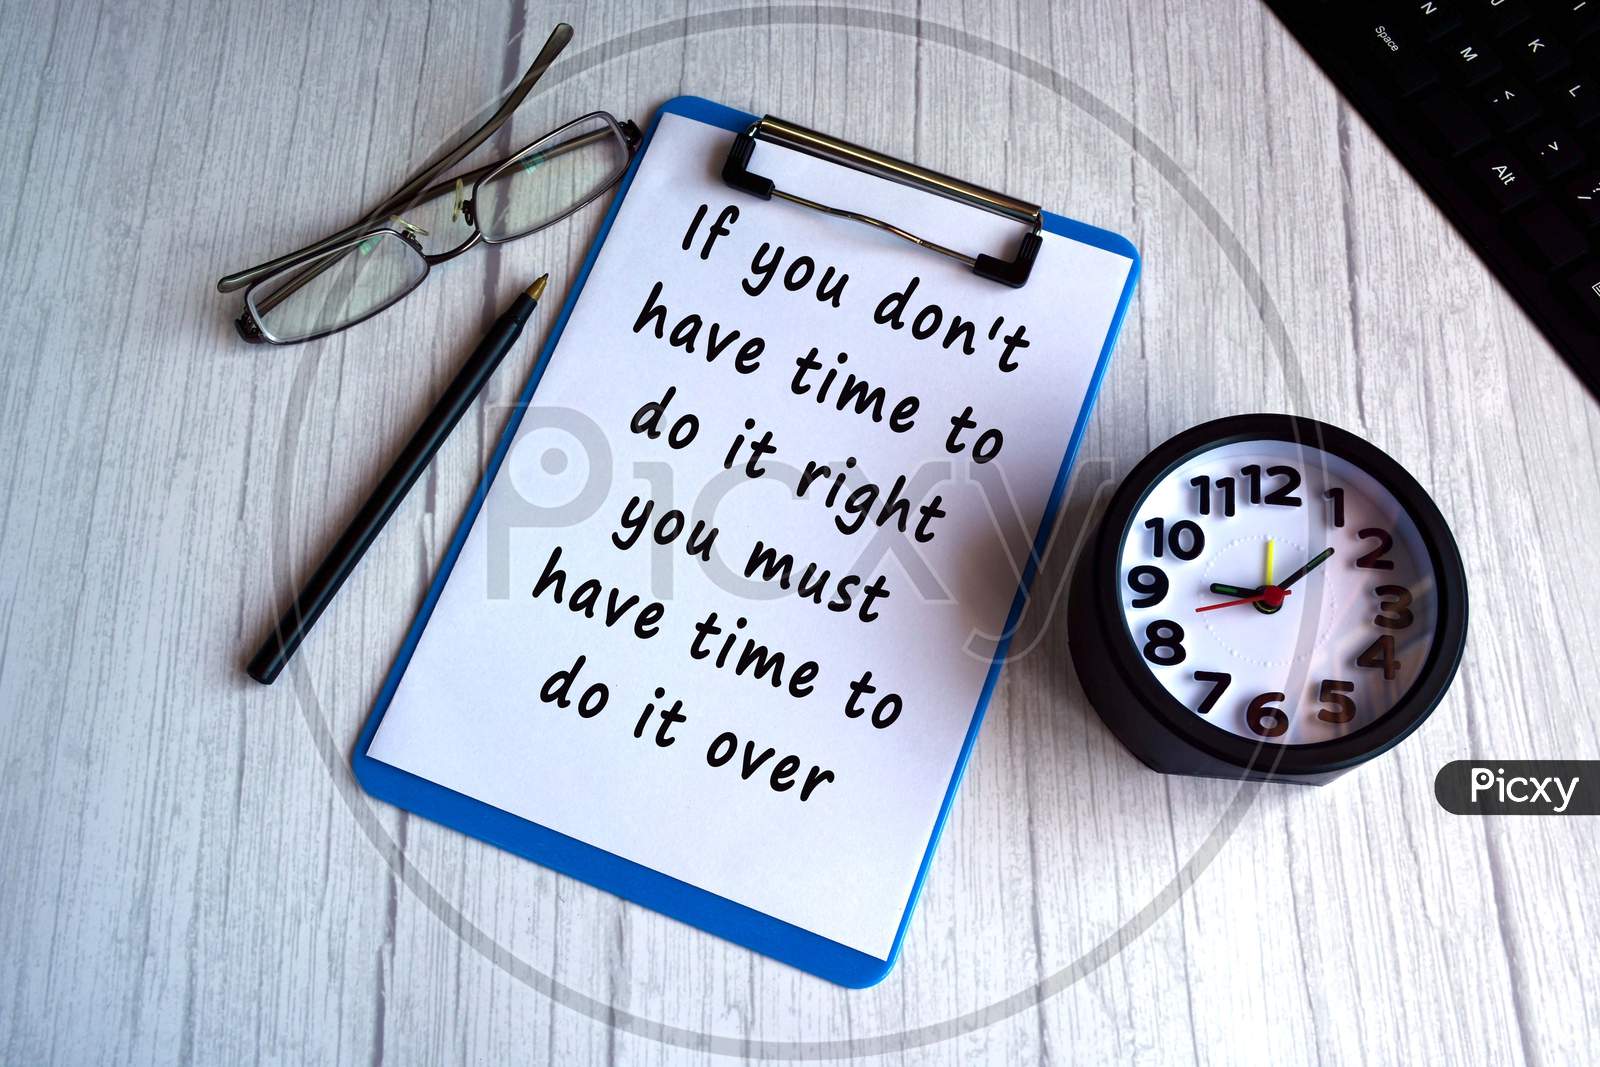 Motivational and inspirational quote on blue clip board with alarm clock, glasses, pen and keyboard on wooden desk - If you do not have time to do it right you must have time to do it over